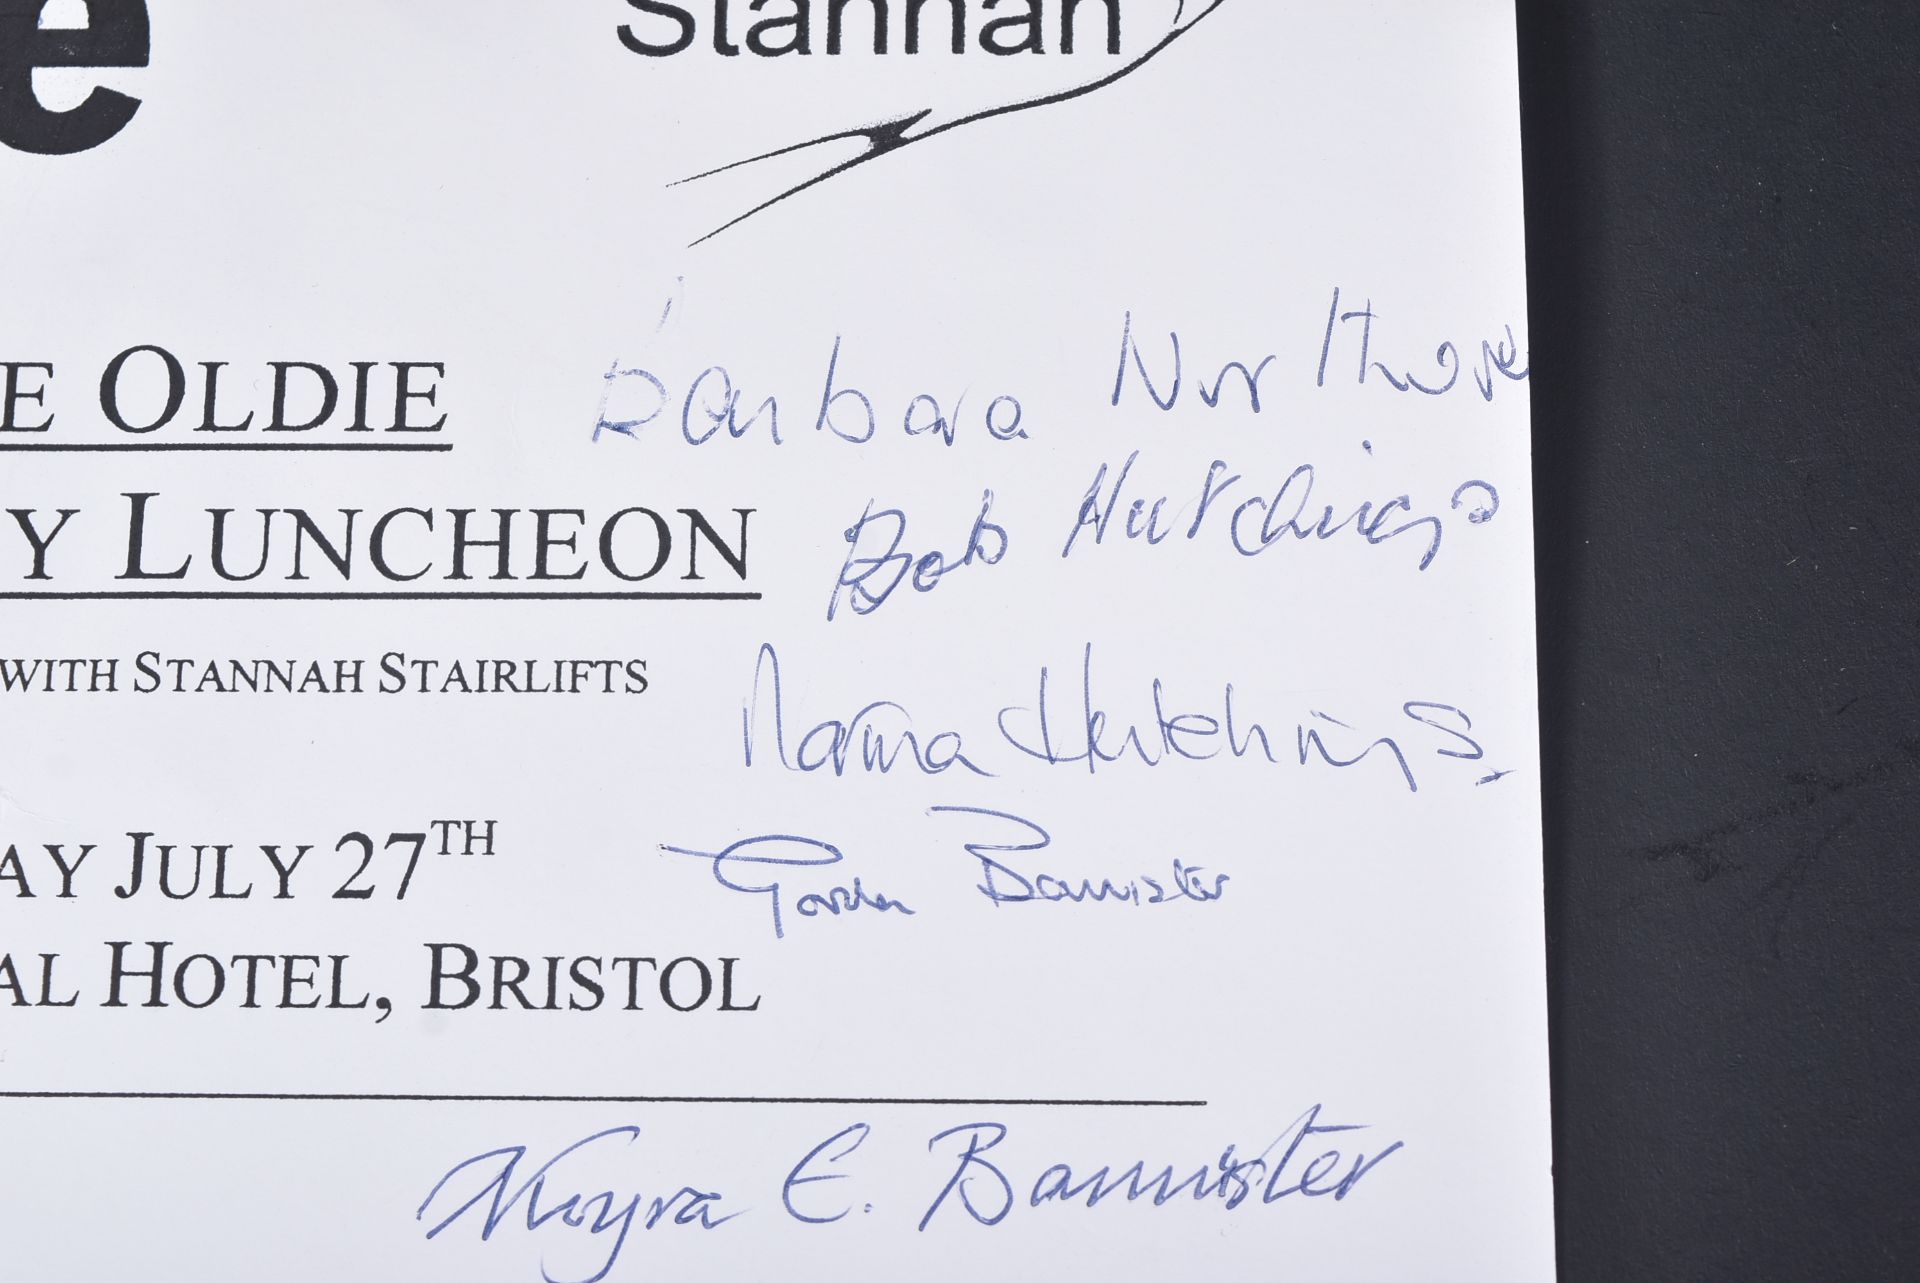 SIR ROGER BANNISTER (1929-2018) & FAMILY - AUTOGRAPHED MENU - Image 2 of 5